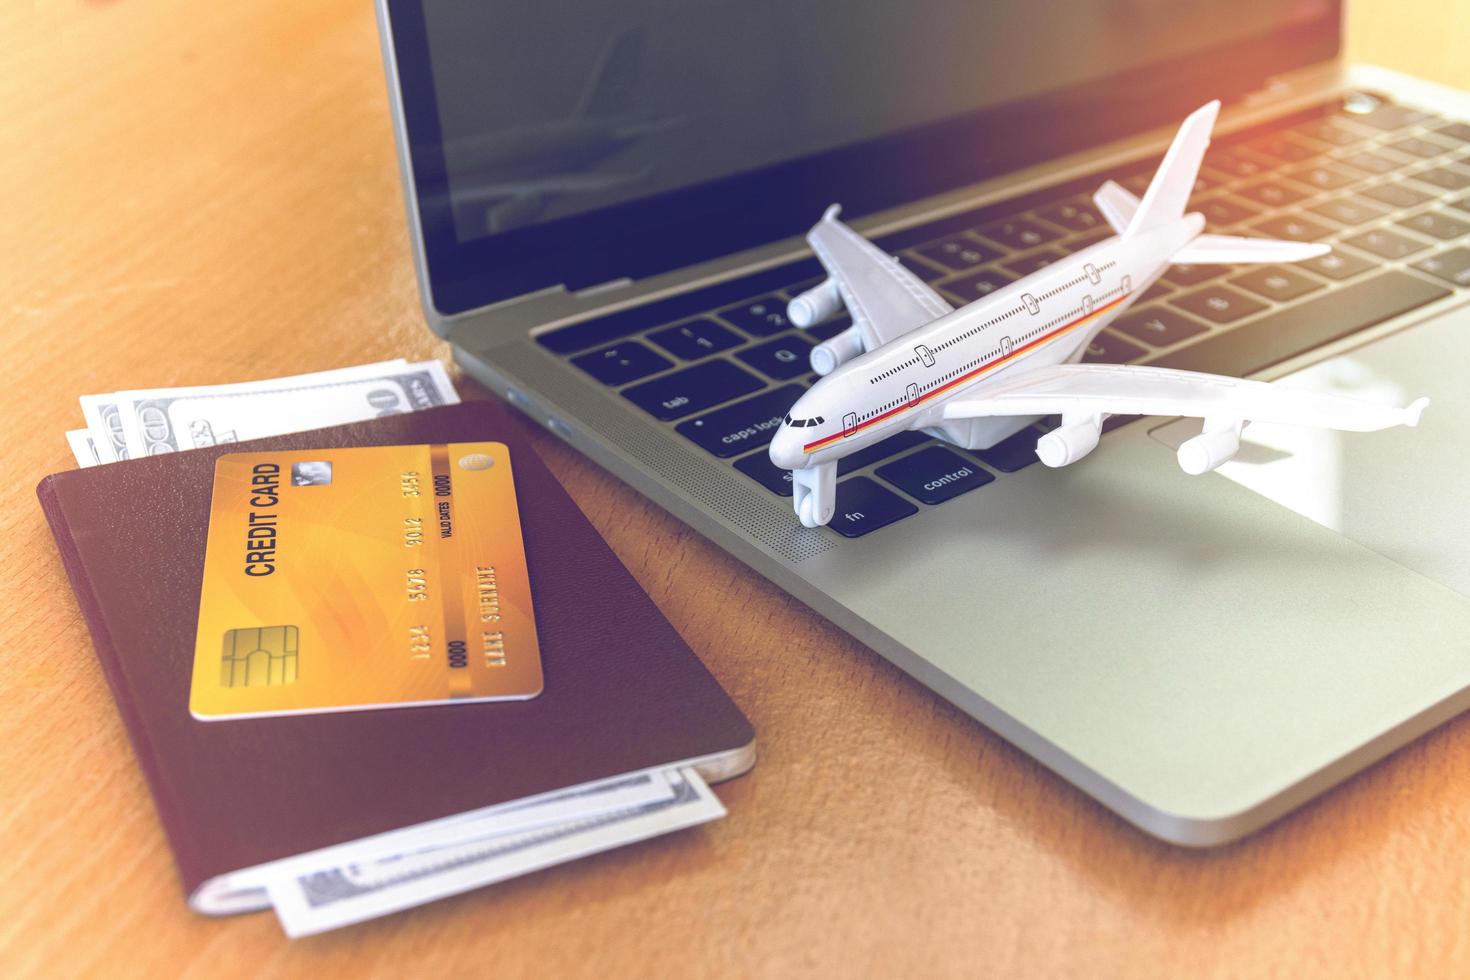 Air tickets, passports and credit card  near laptop computer and airplane on table. Online ticket booking concept photo